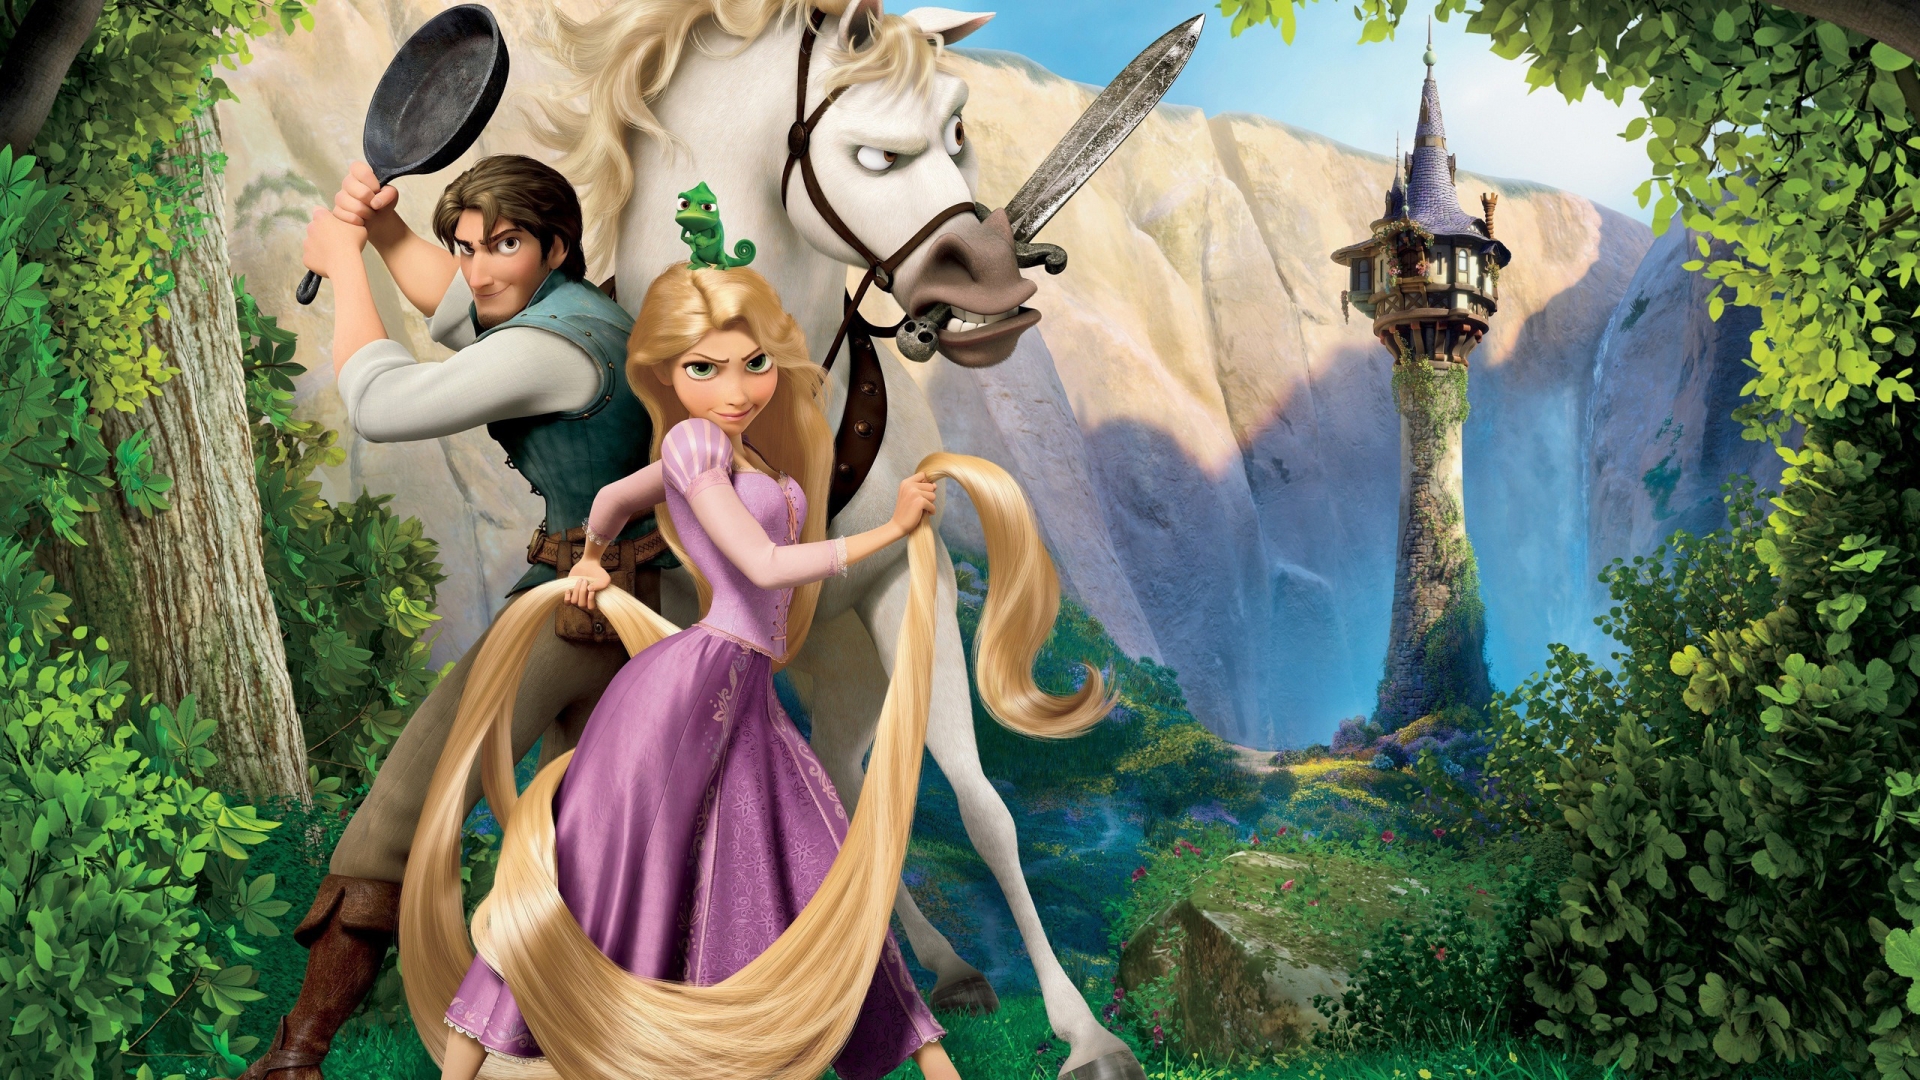 Tangled Animated Musical Film for 1920 x 1080 HDTV 1080p resolution